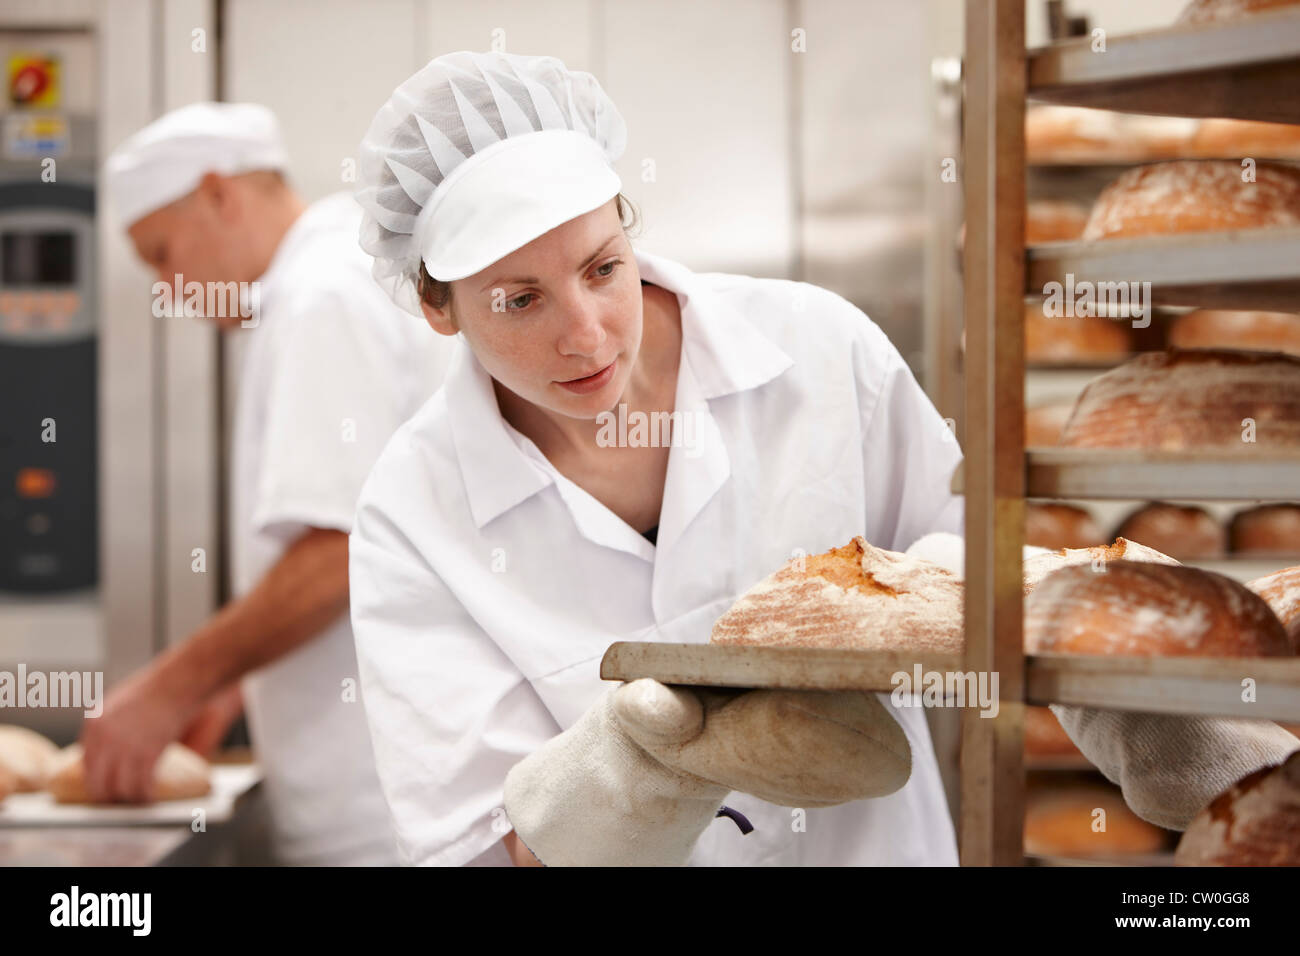 Chef carrying tray of bread in kitchen Stock Photo